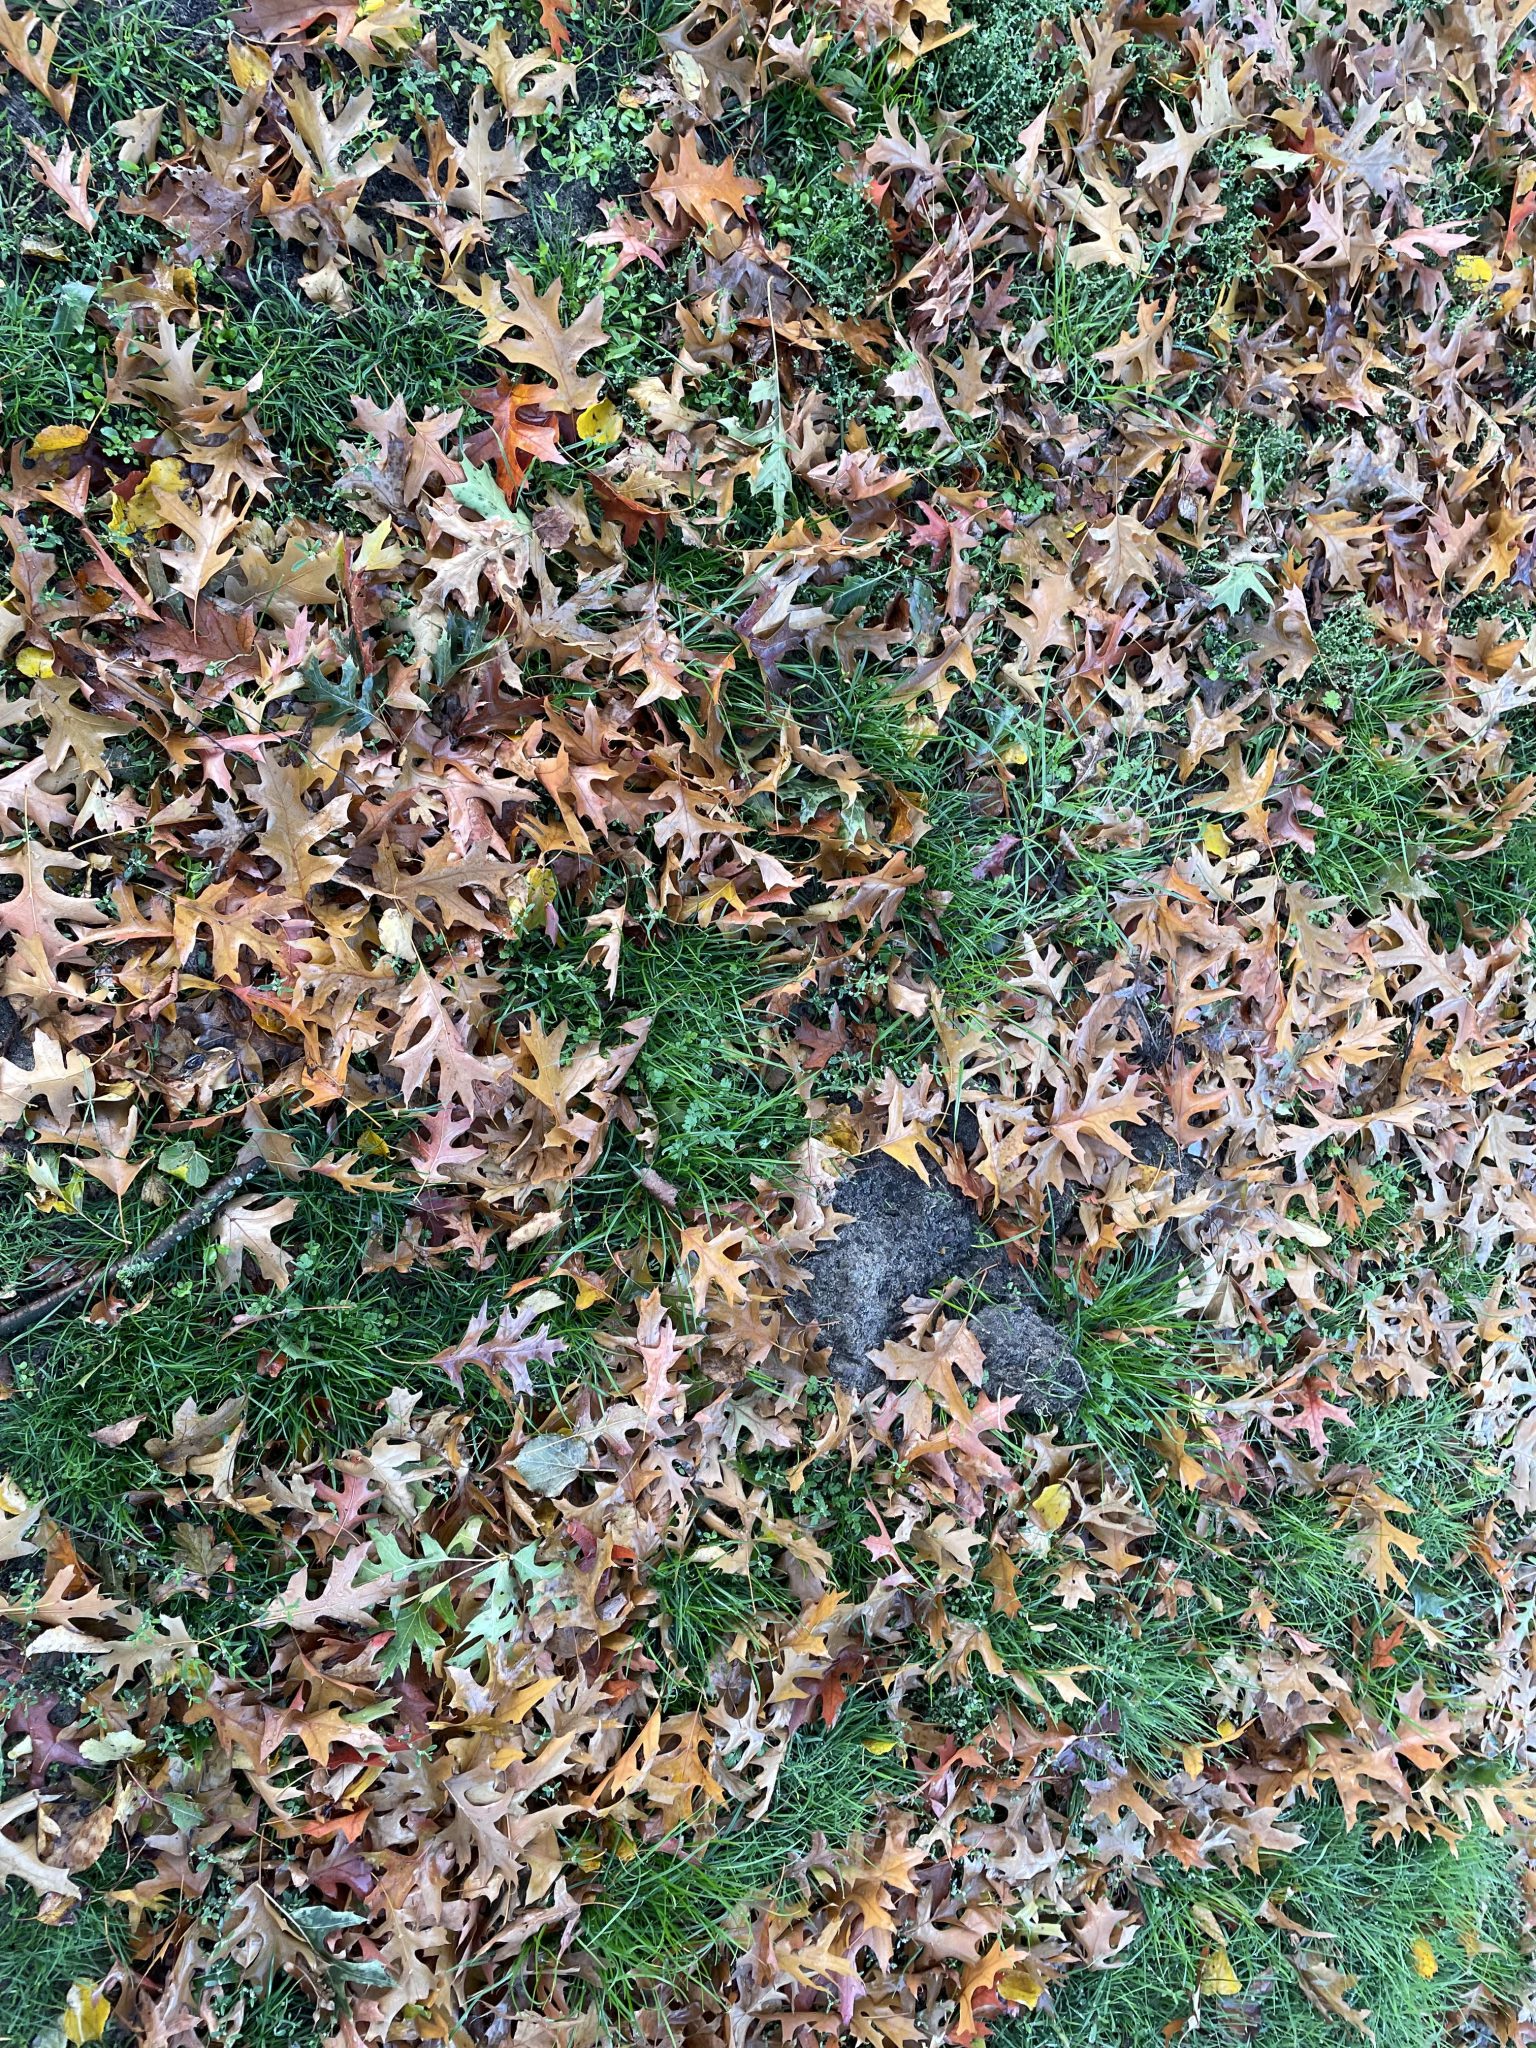 Multi-colored autoumn leaves on a green lawn. Perspective and distance would be like looking at your feet.